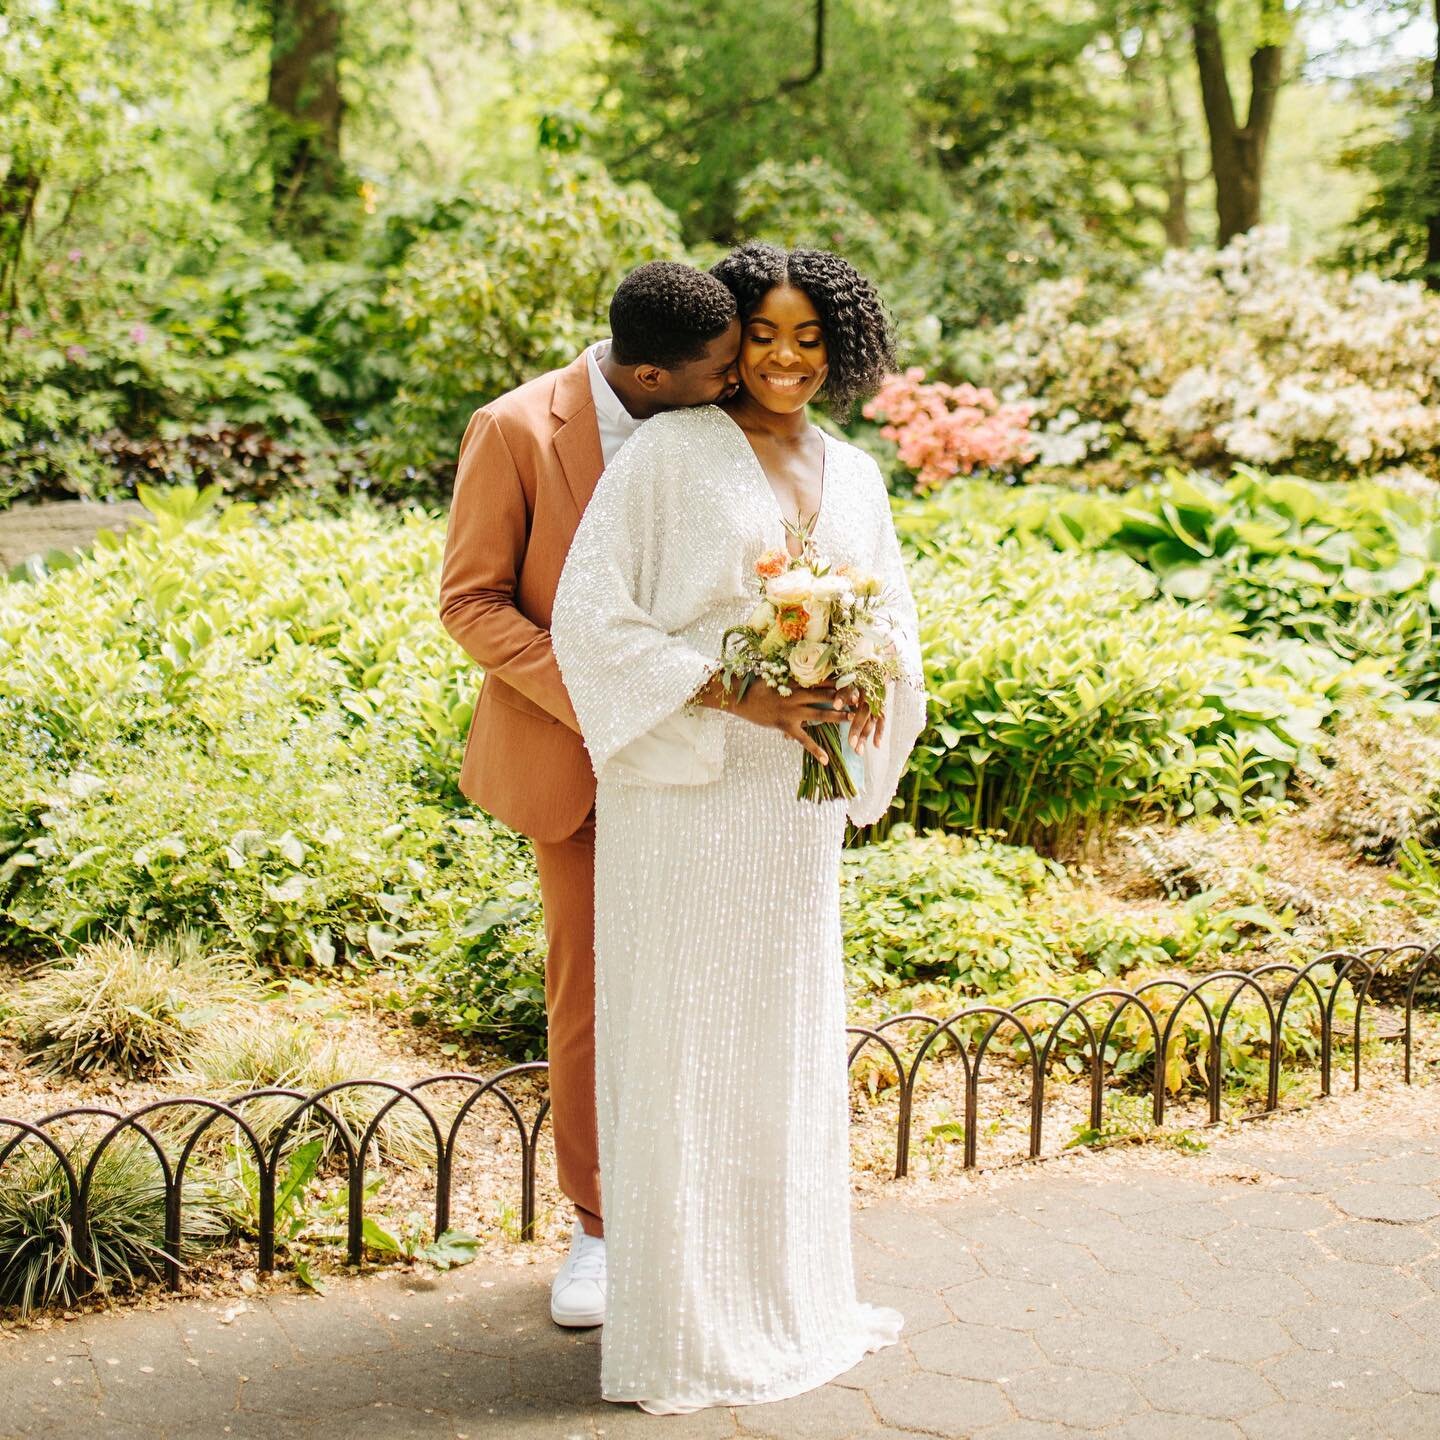 So excited to share this Central Park elopement! Planning, shooting and meeting all the incredible vendors was amazing! You can see more on my blog! 

Important things to know if you want to get married in Central Park: 
1. You DO NOT need a permit i